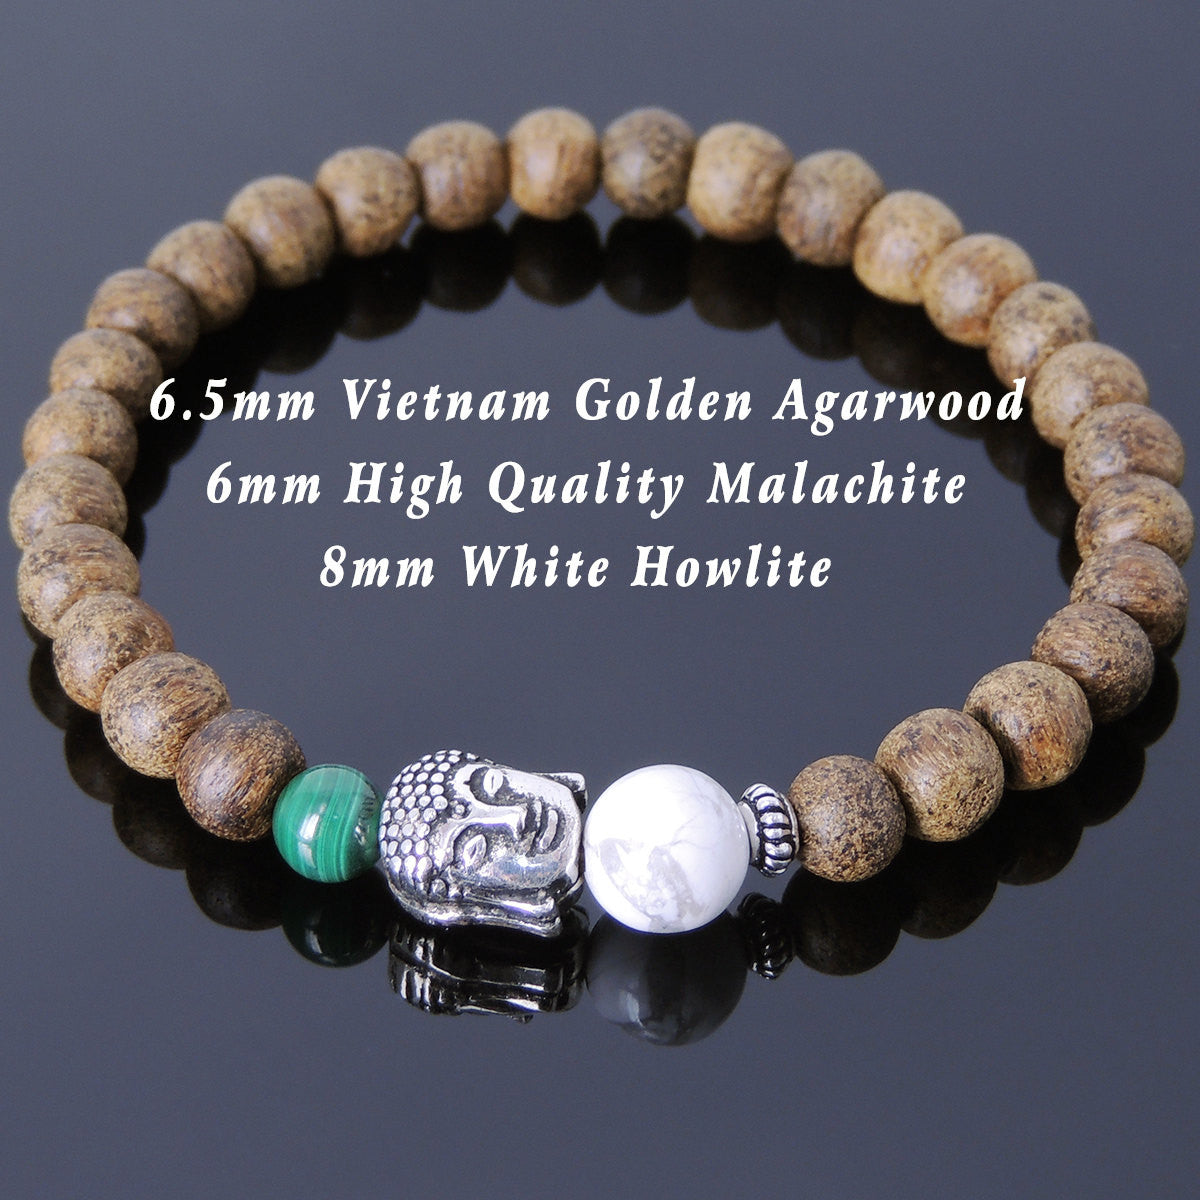 White Howlite, Malachite, & Agarwood Bracelet for Prayer & Meditation with S925 Sterling Silver Spacer & Guanyin Buddha Protection Bead - Handmade by Gem & Silver BR700